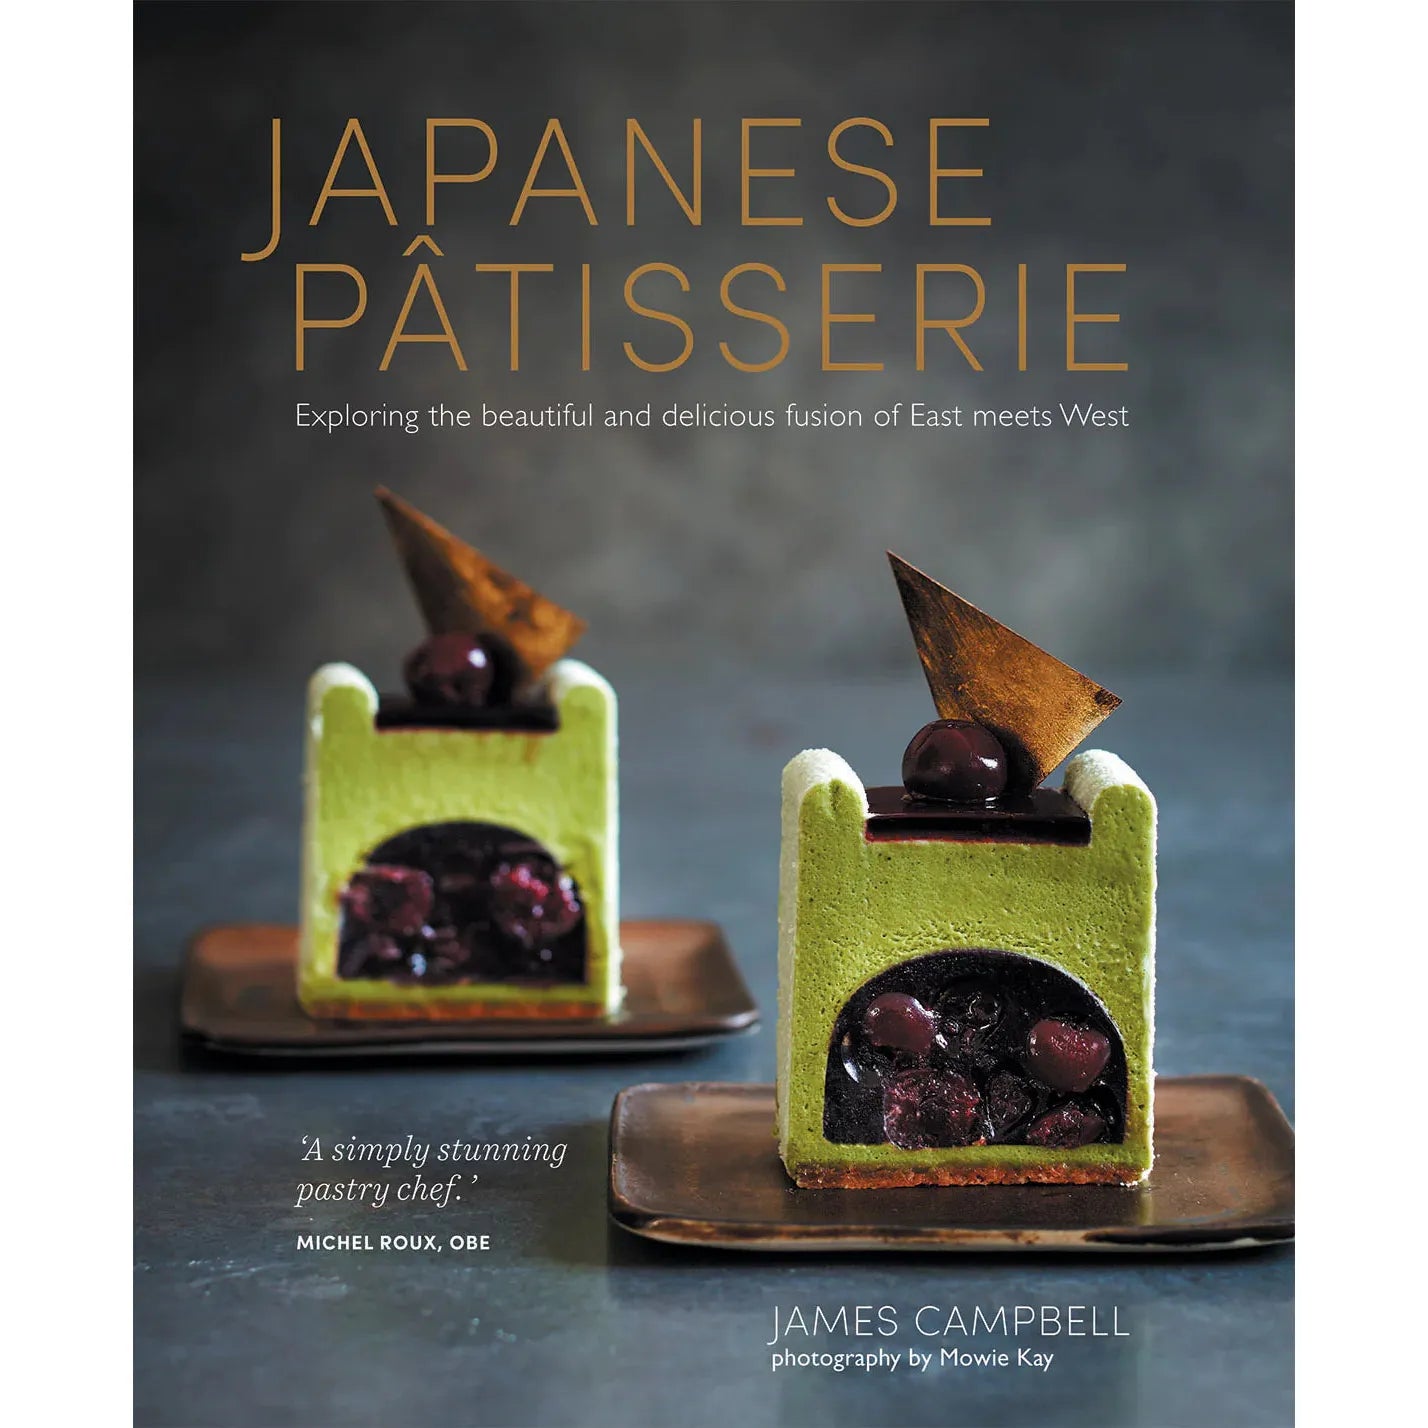 Japanese Pâtisserie: Exploring the Beautiful and Delicious Fusion of East Meets West